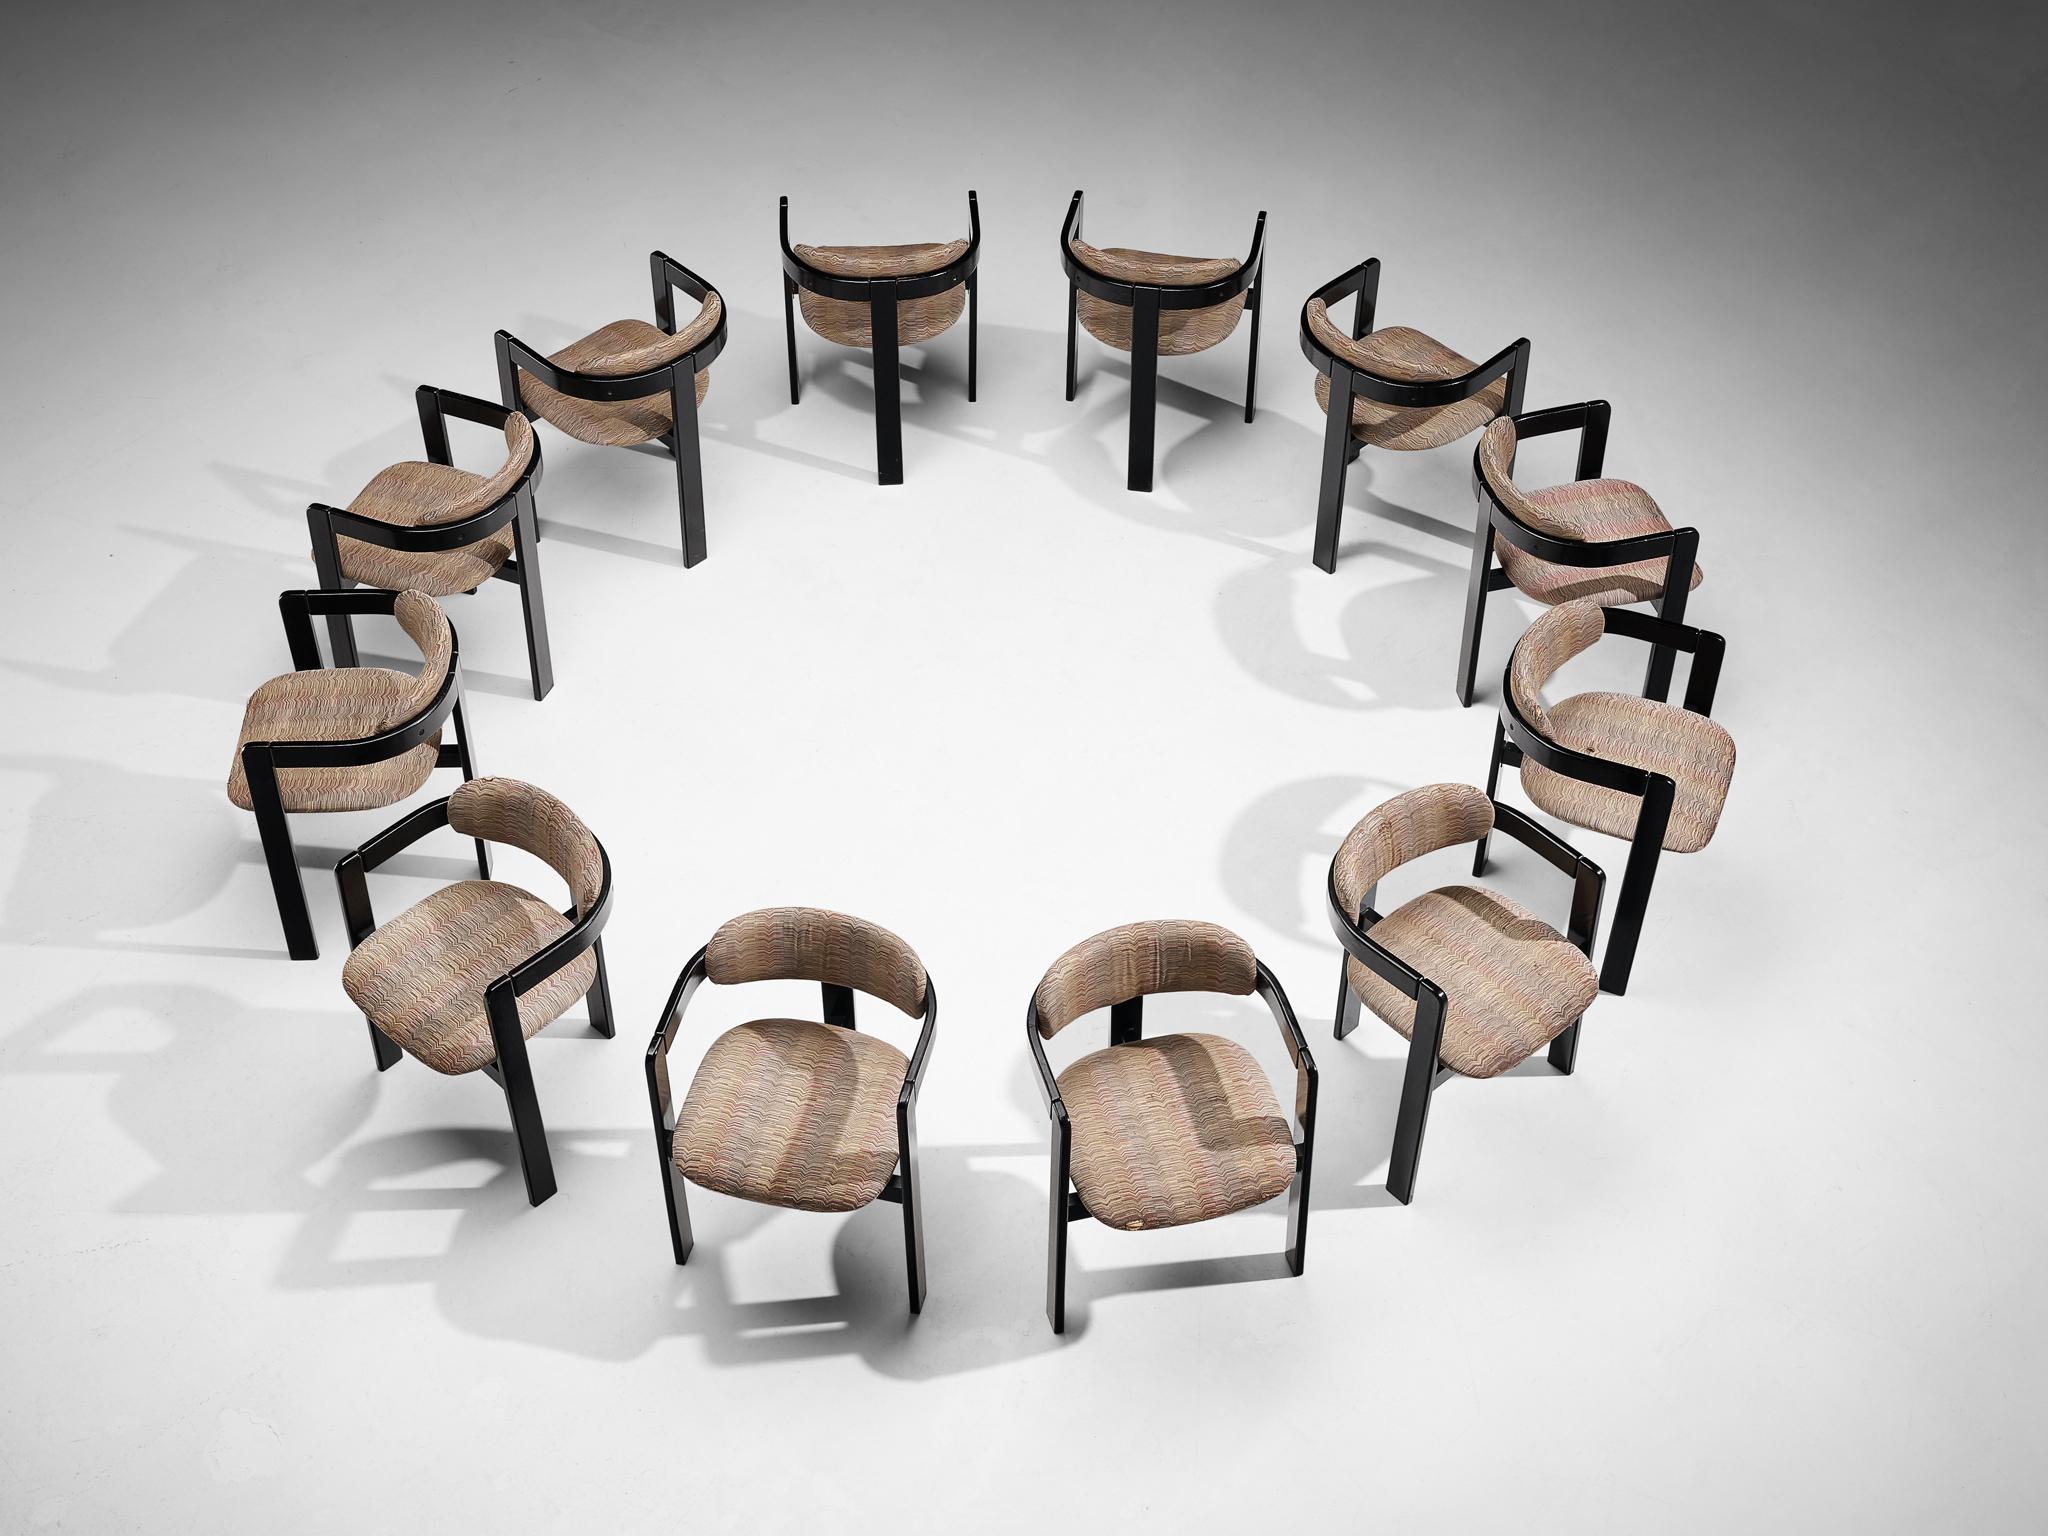 Set of twelve dining chairs, wood, fabric, Italy, 1970s

This lovely set of Italian dining chair has a strong resemblance to Augusto Savini's 'Pamplona' chair (1965) and Afra & Tobia Scrapa's 'Pigreco' chair (1959/60), yet the designs are different